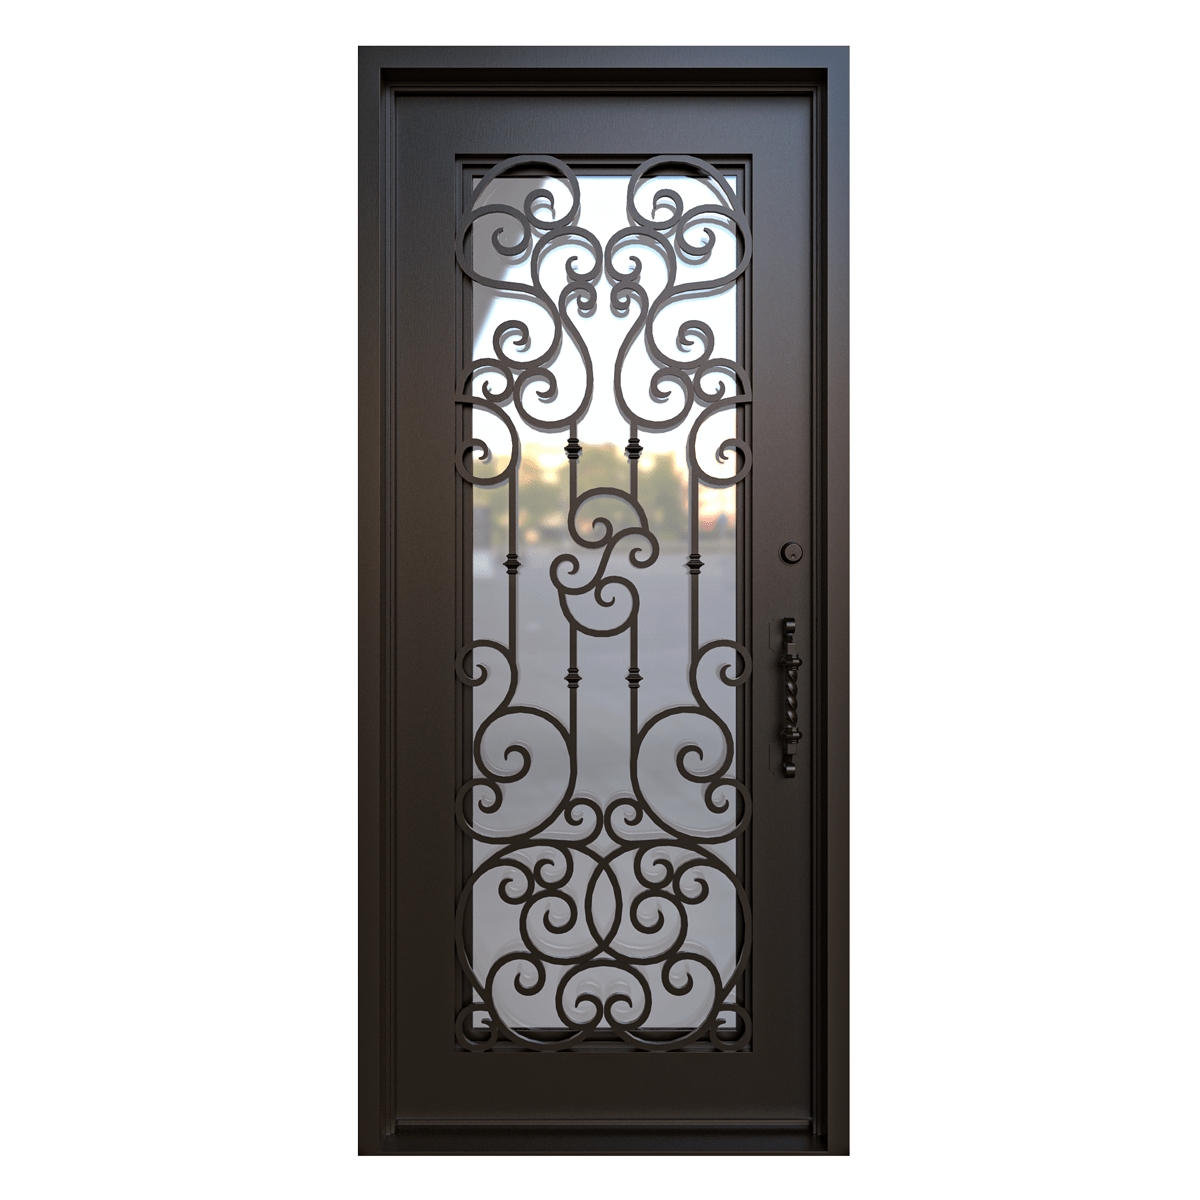 Can Customized Wrought Iron Doors Add Value to My Home? - Big D Building  Center